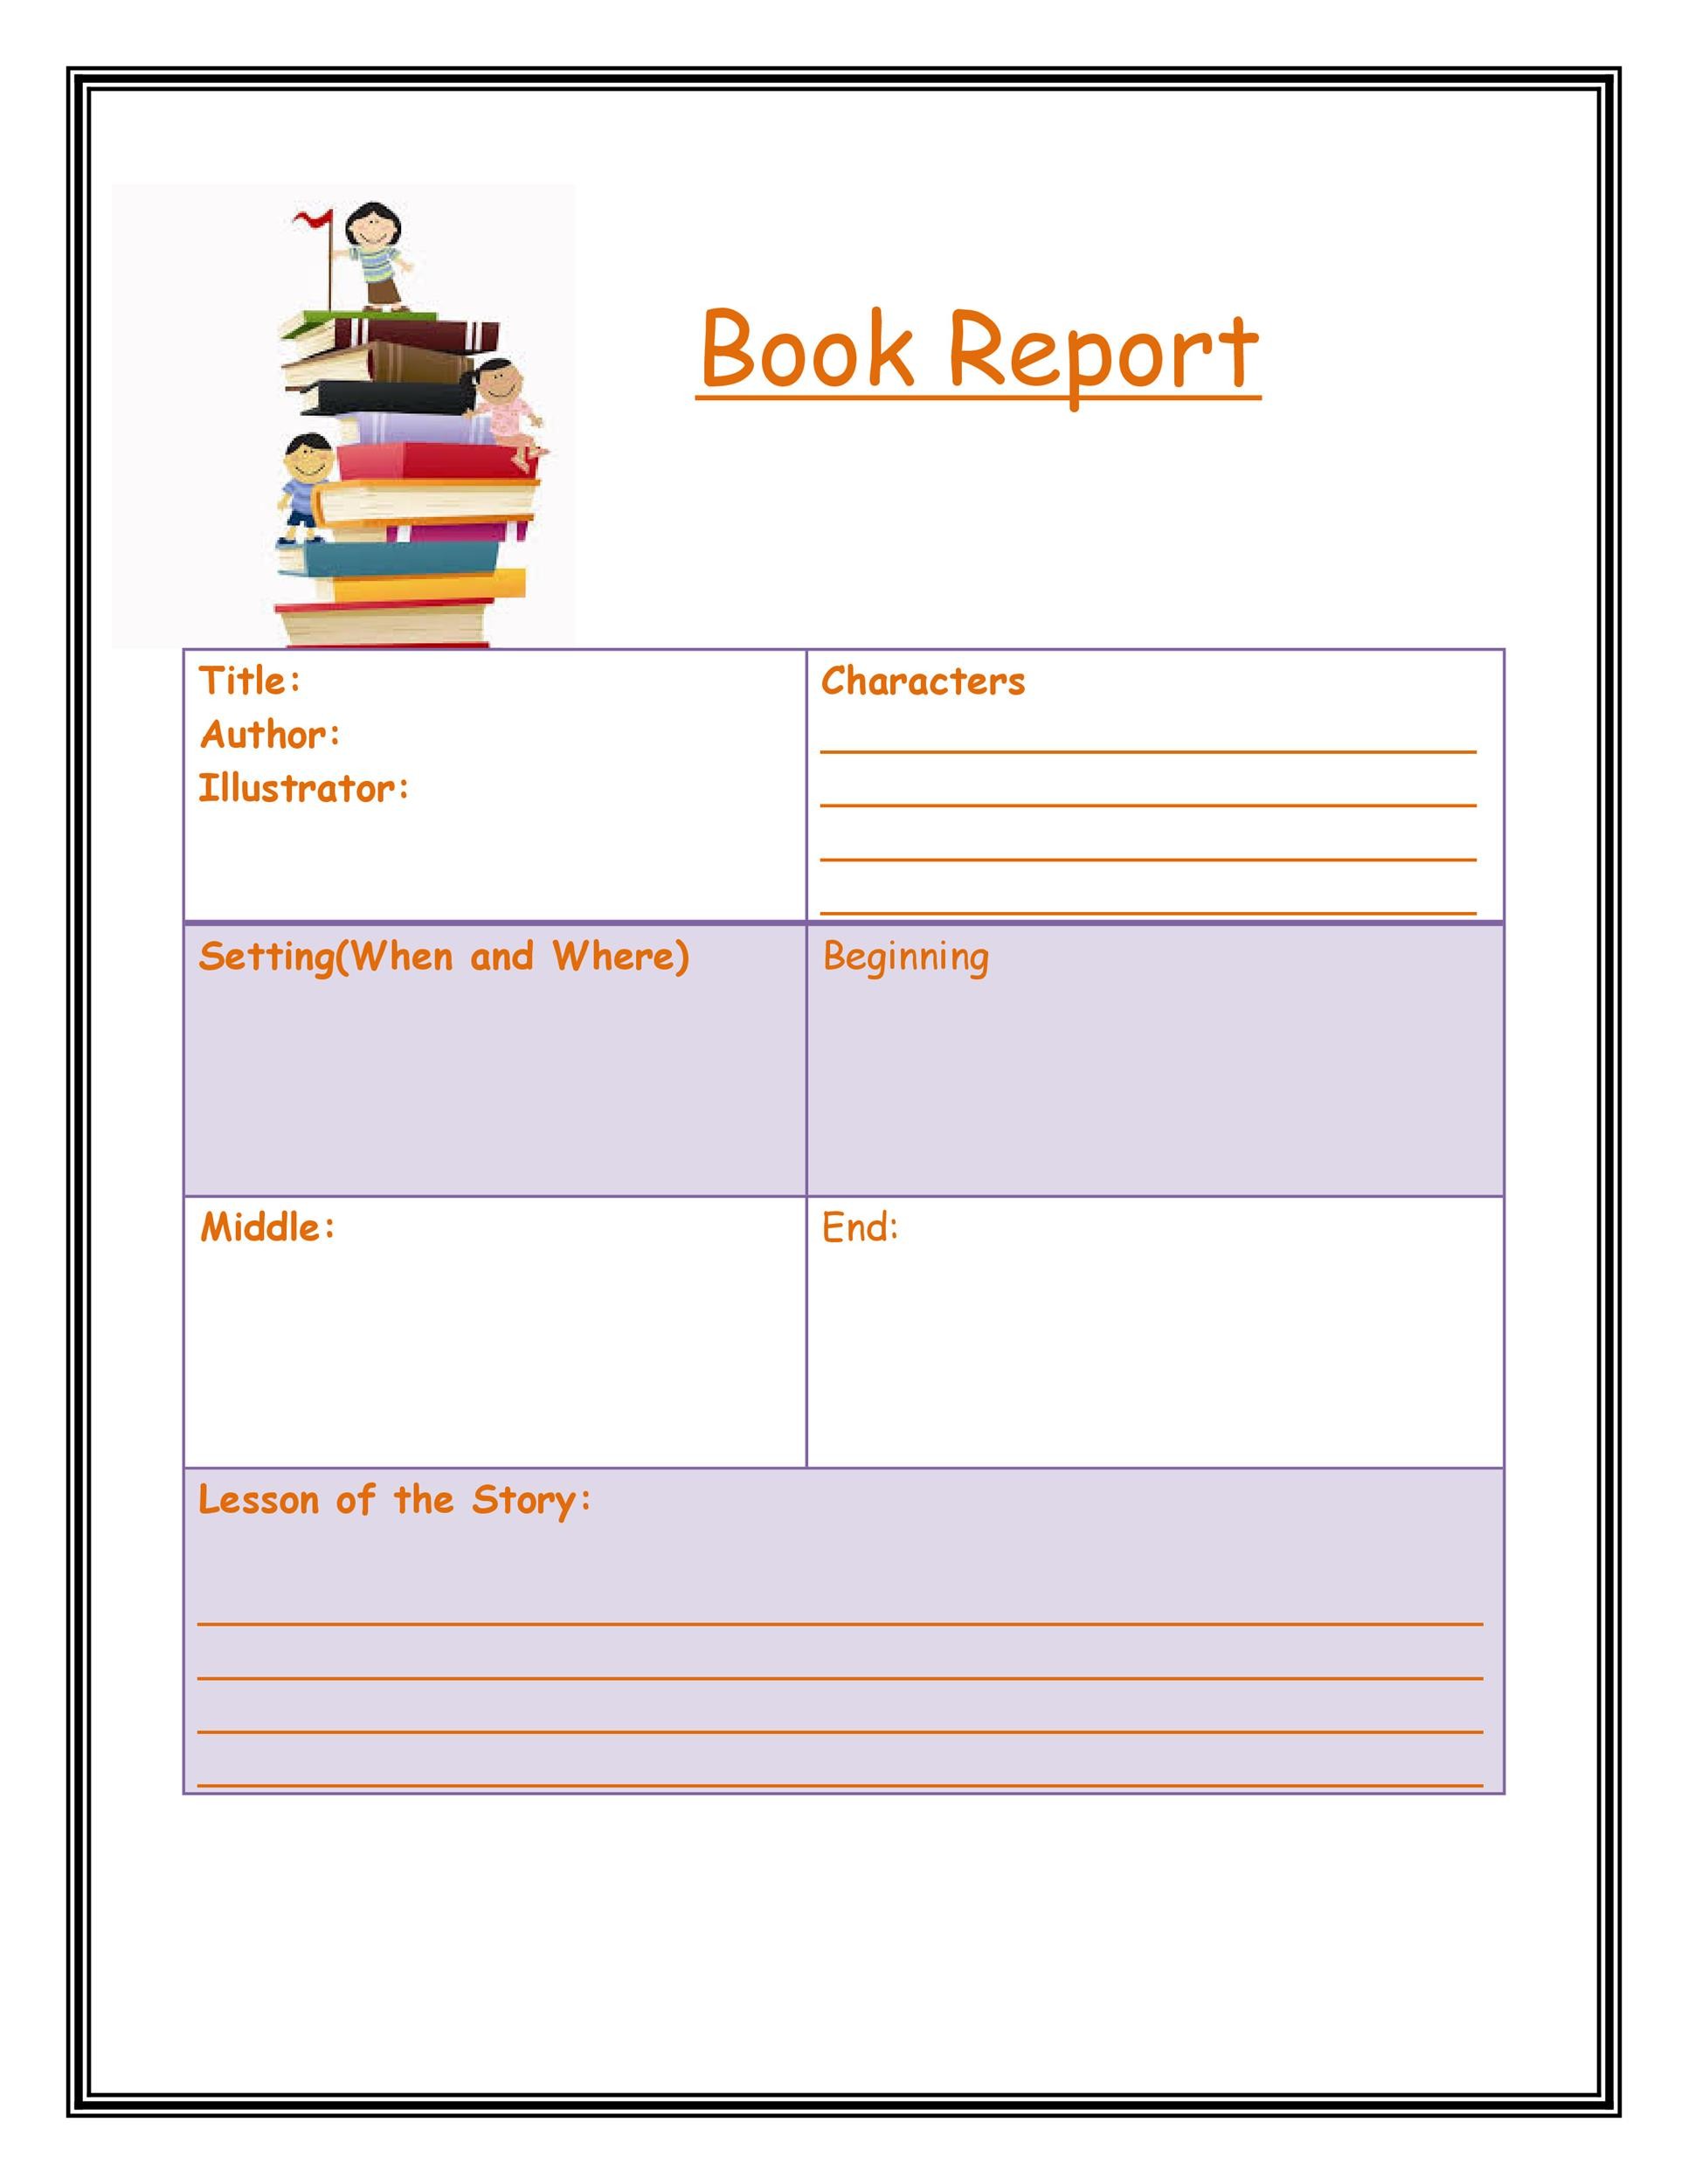 Write my book report com - How to Write a Book Report In Story Report Template